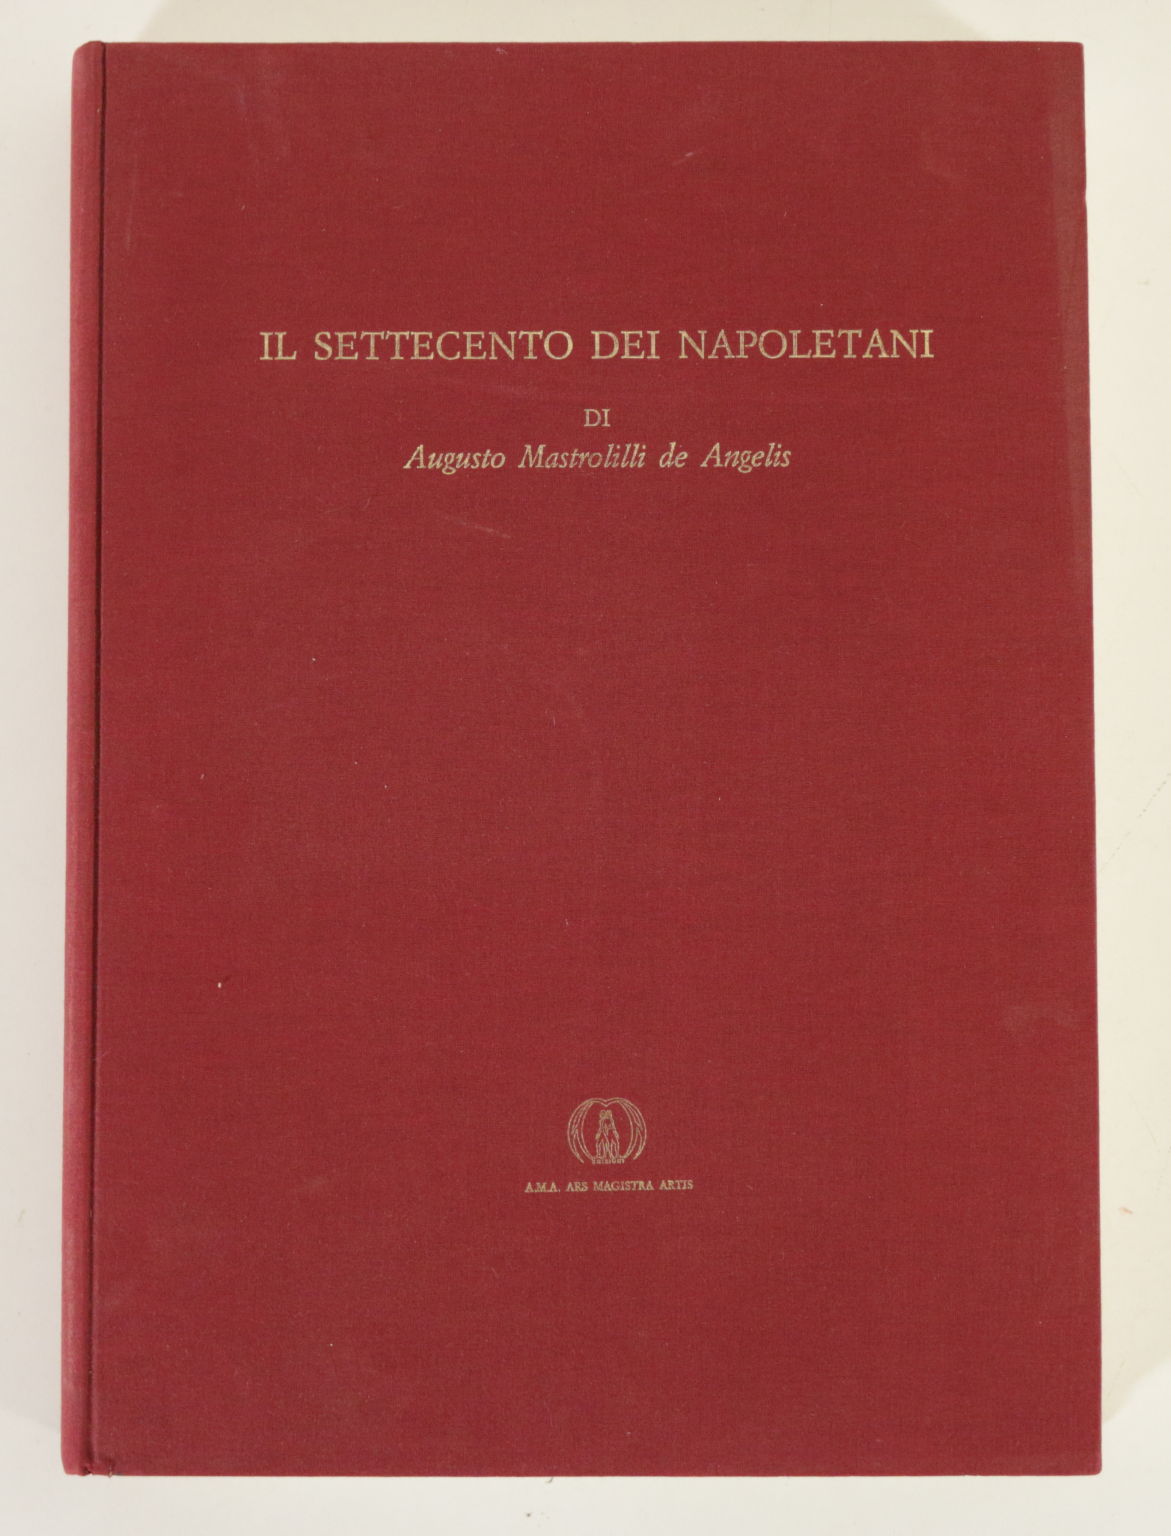 The eighteenth century of the Neapolitans by Augusto Mastrolill, Angelo Calabrese